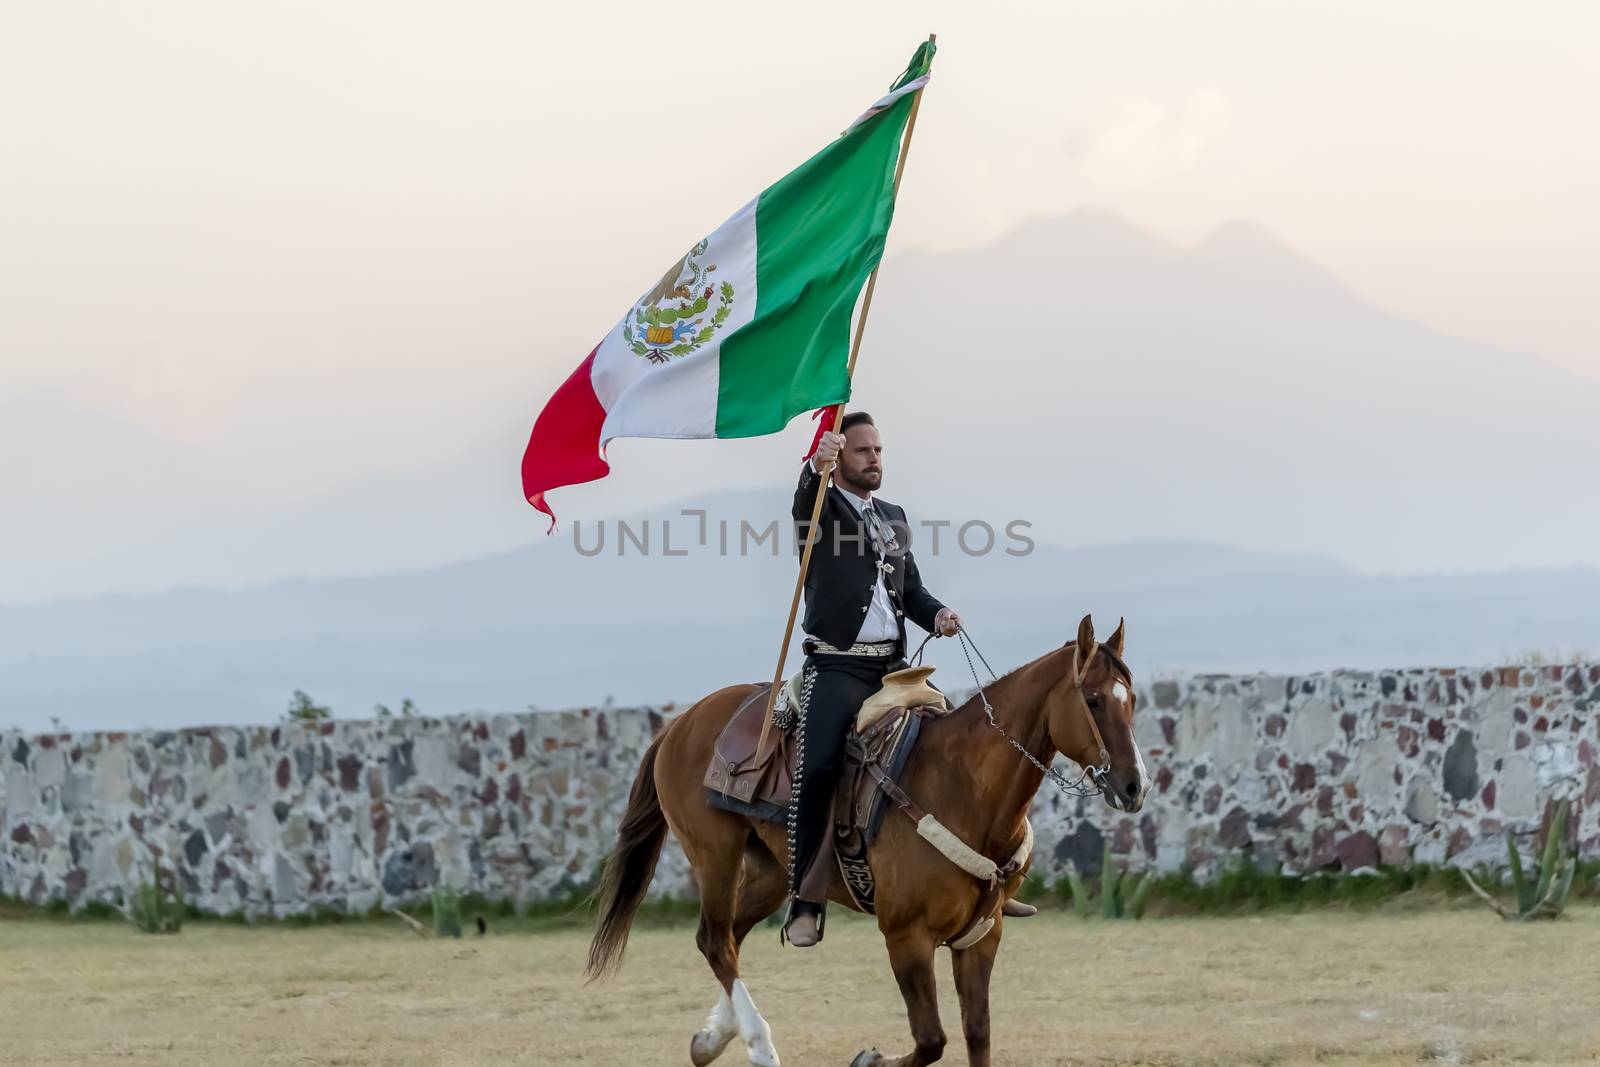 A handsome Mexican Charro poses in front of a hacienda in the Mexican countryside while holding the Mexican Flag